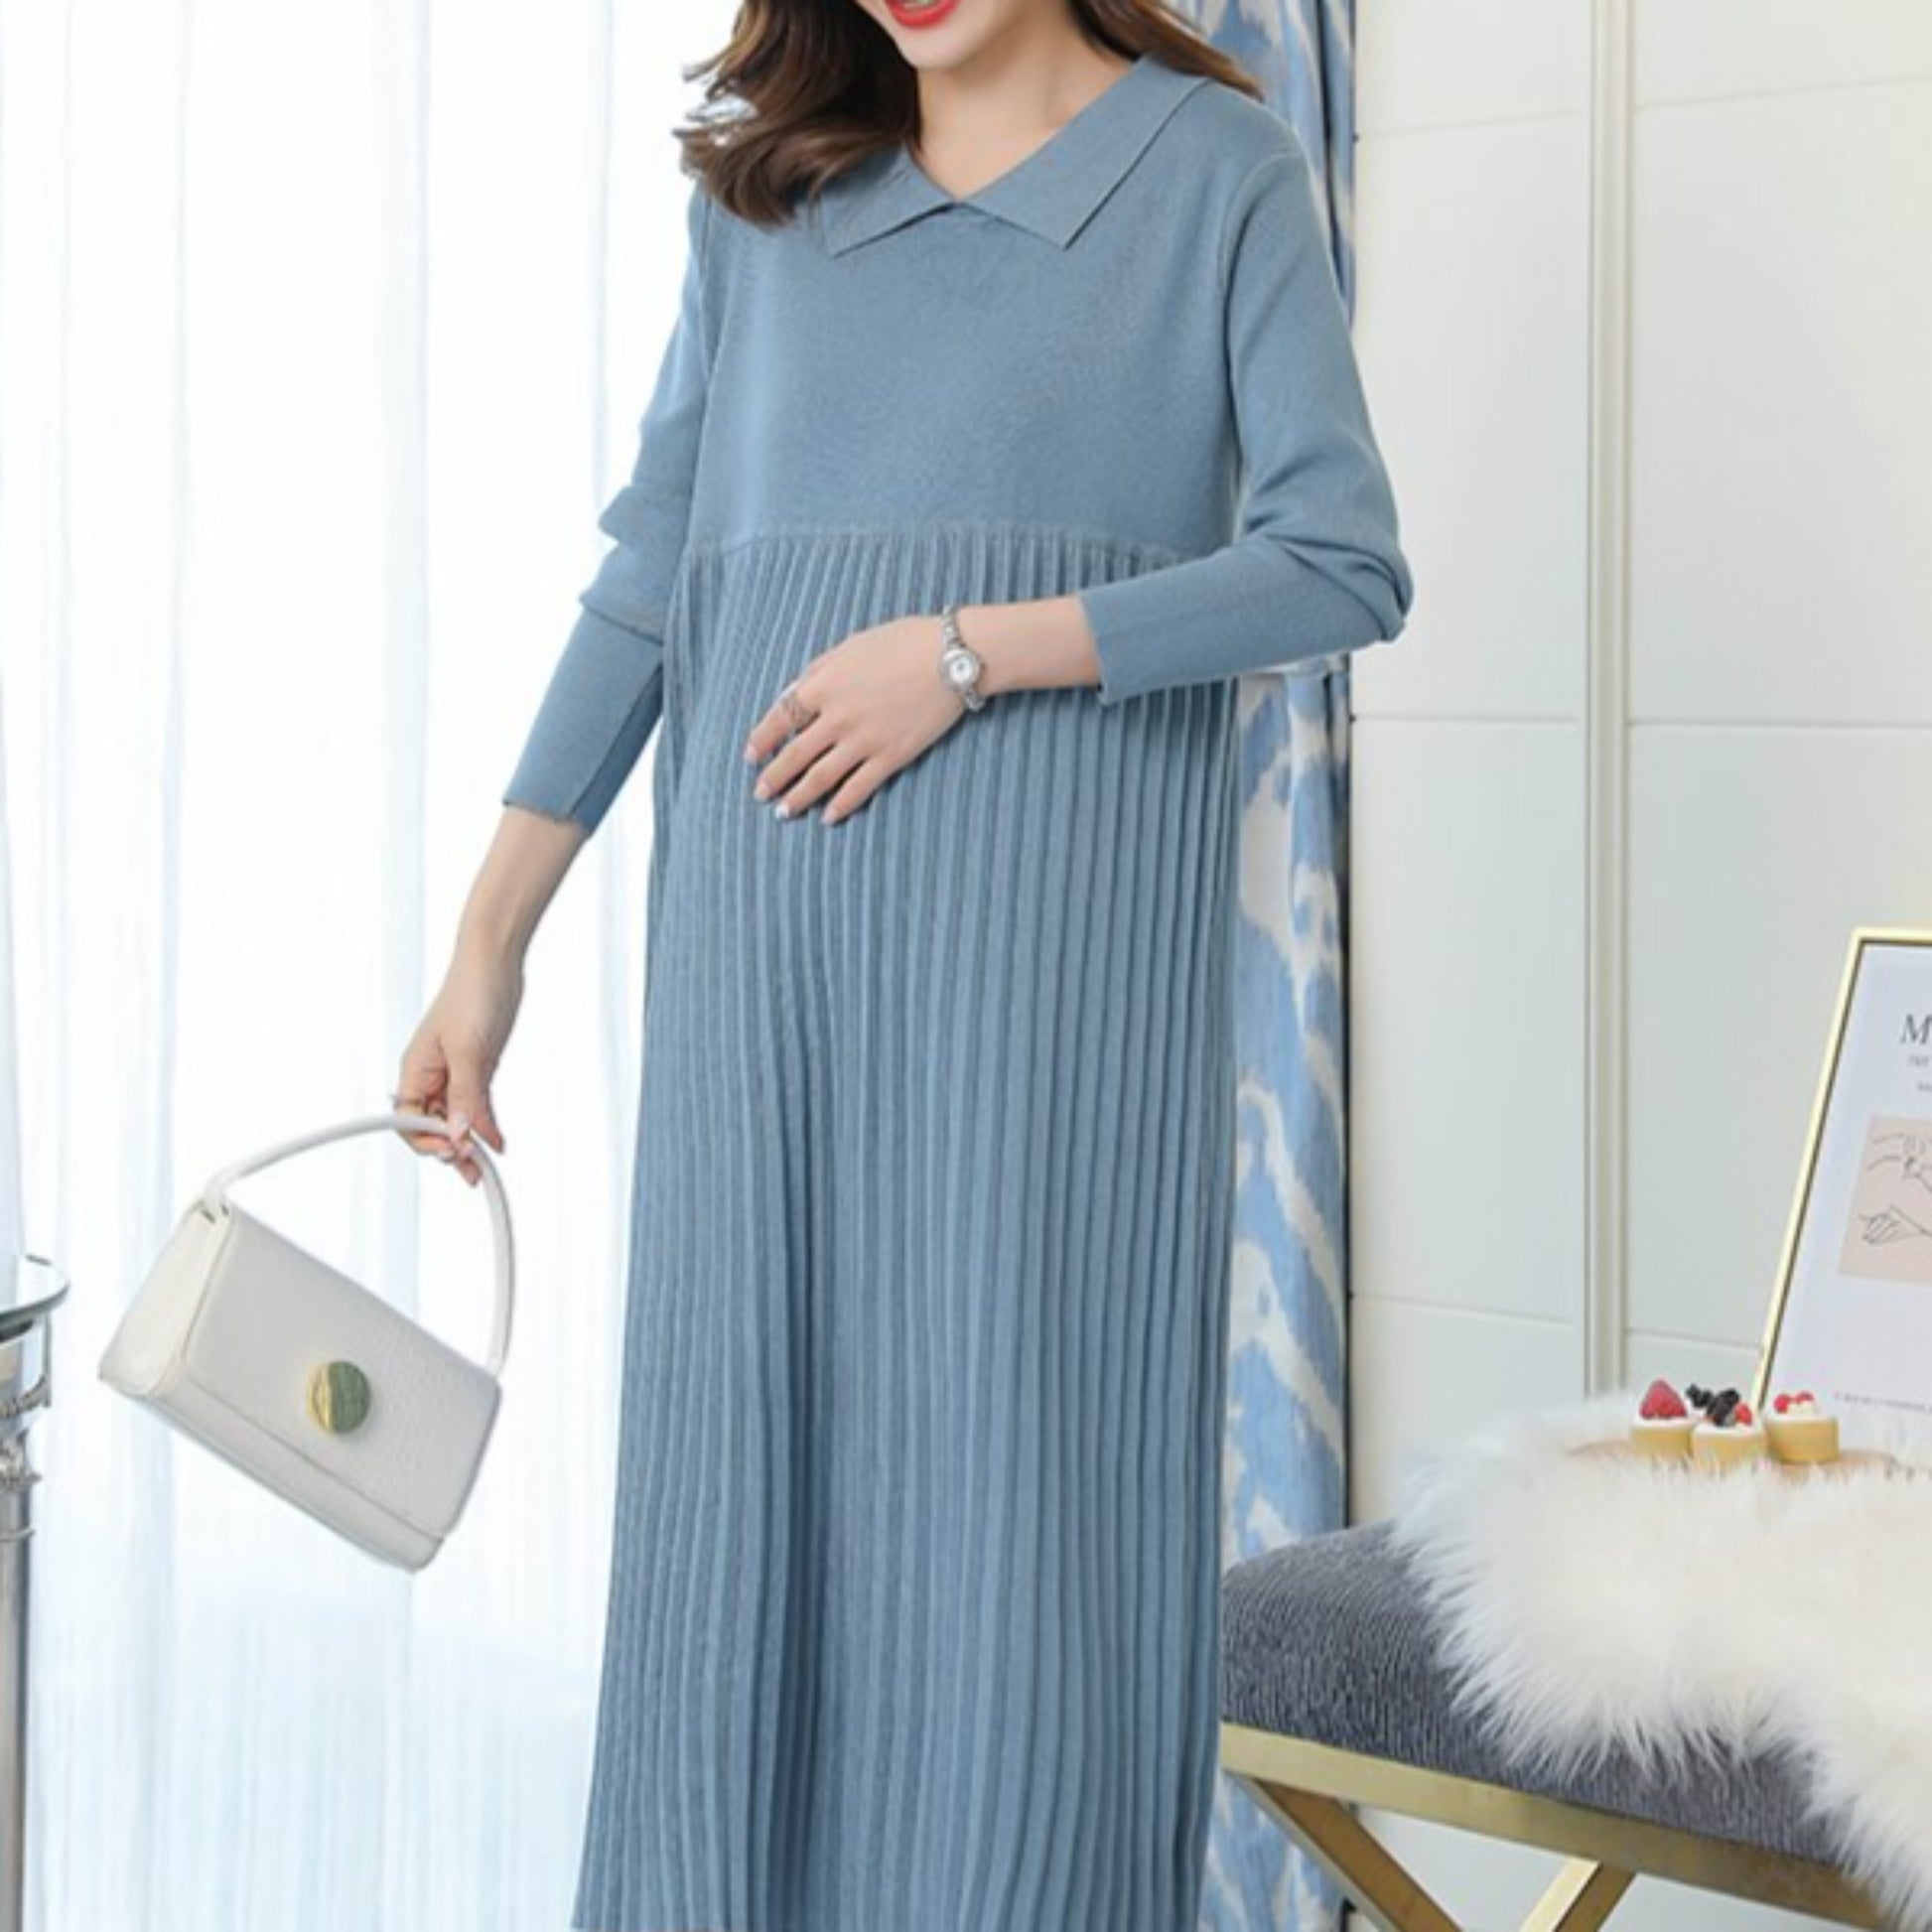 Warm knitted maternity modest dress